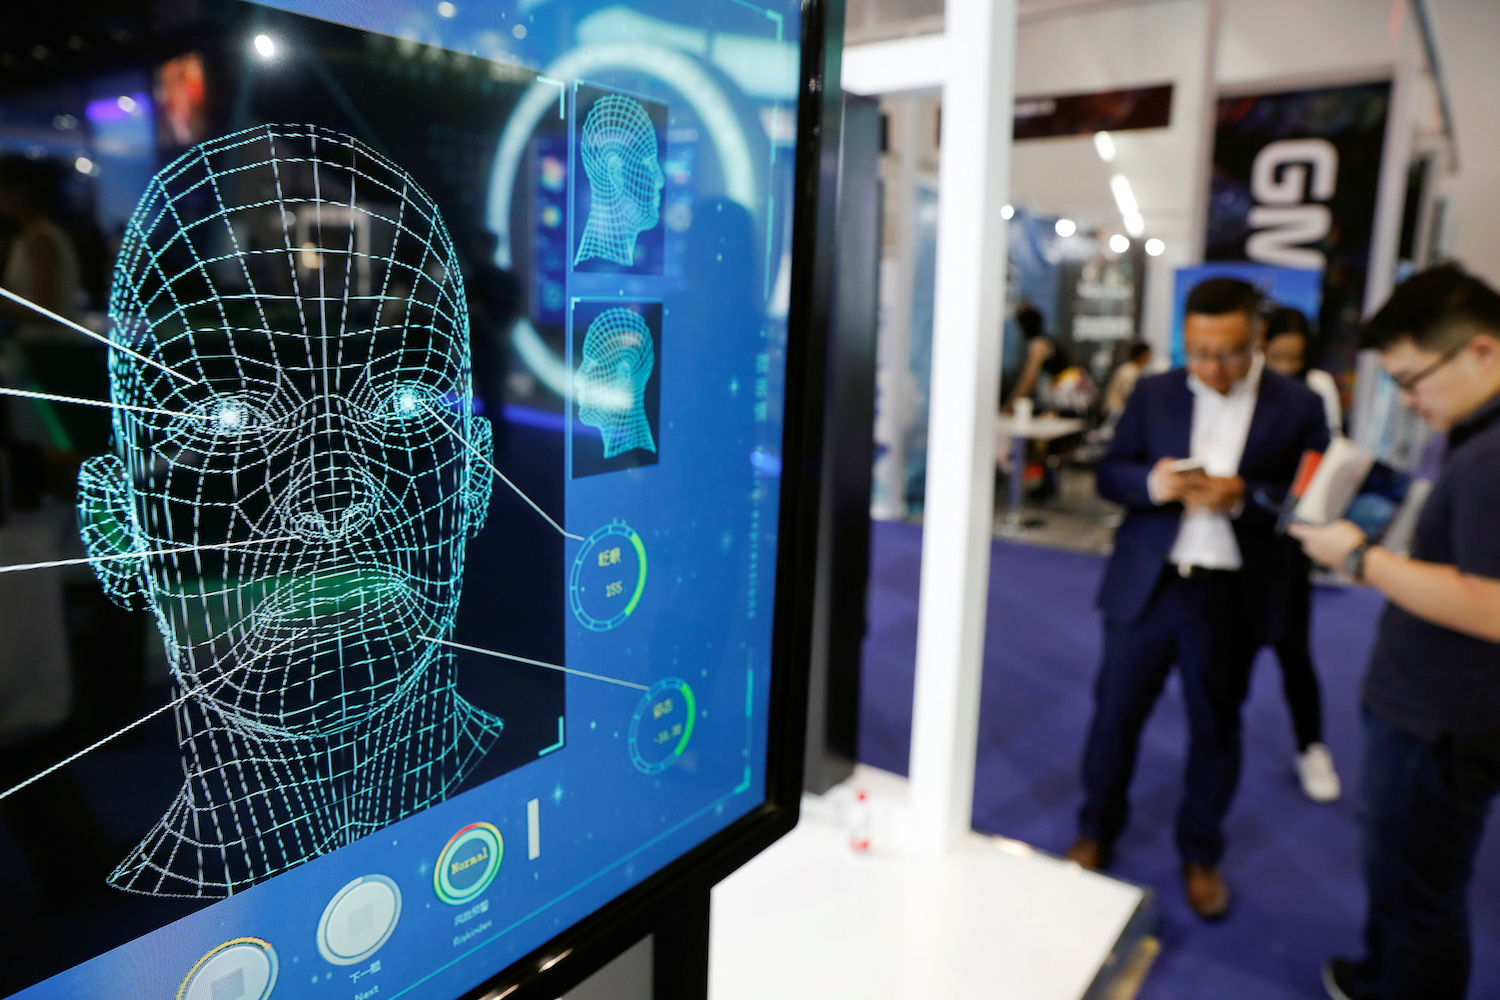 Chinese court may rule on legality of firms keeping facial data